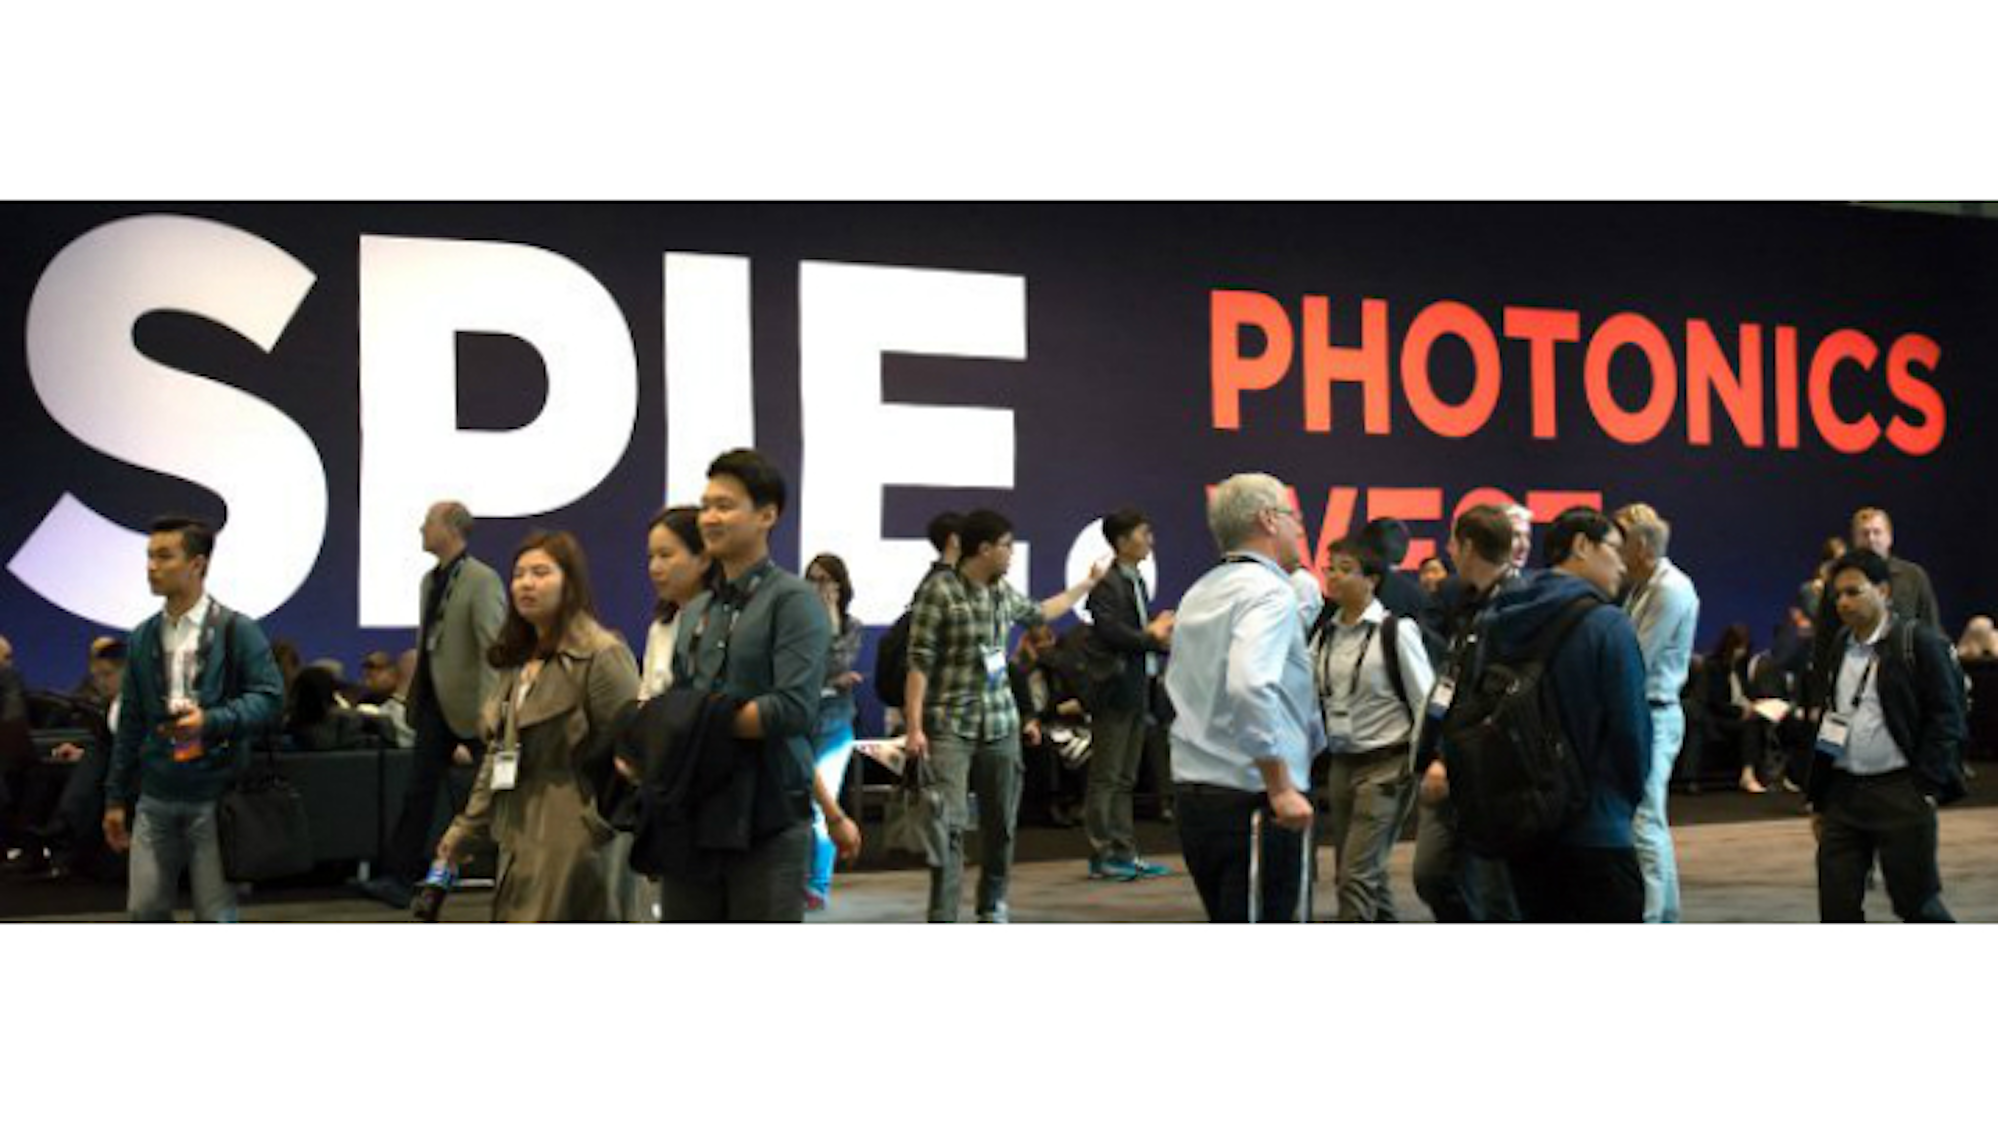 SPIE Photonics West 2020 brings new and interesting developments in